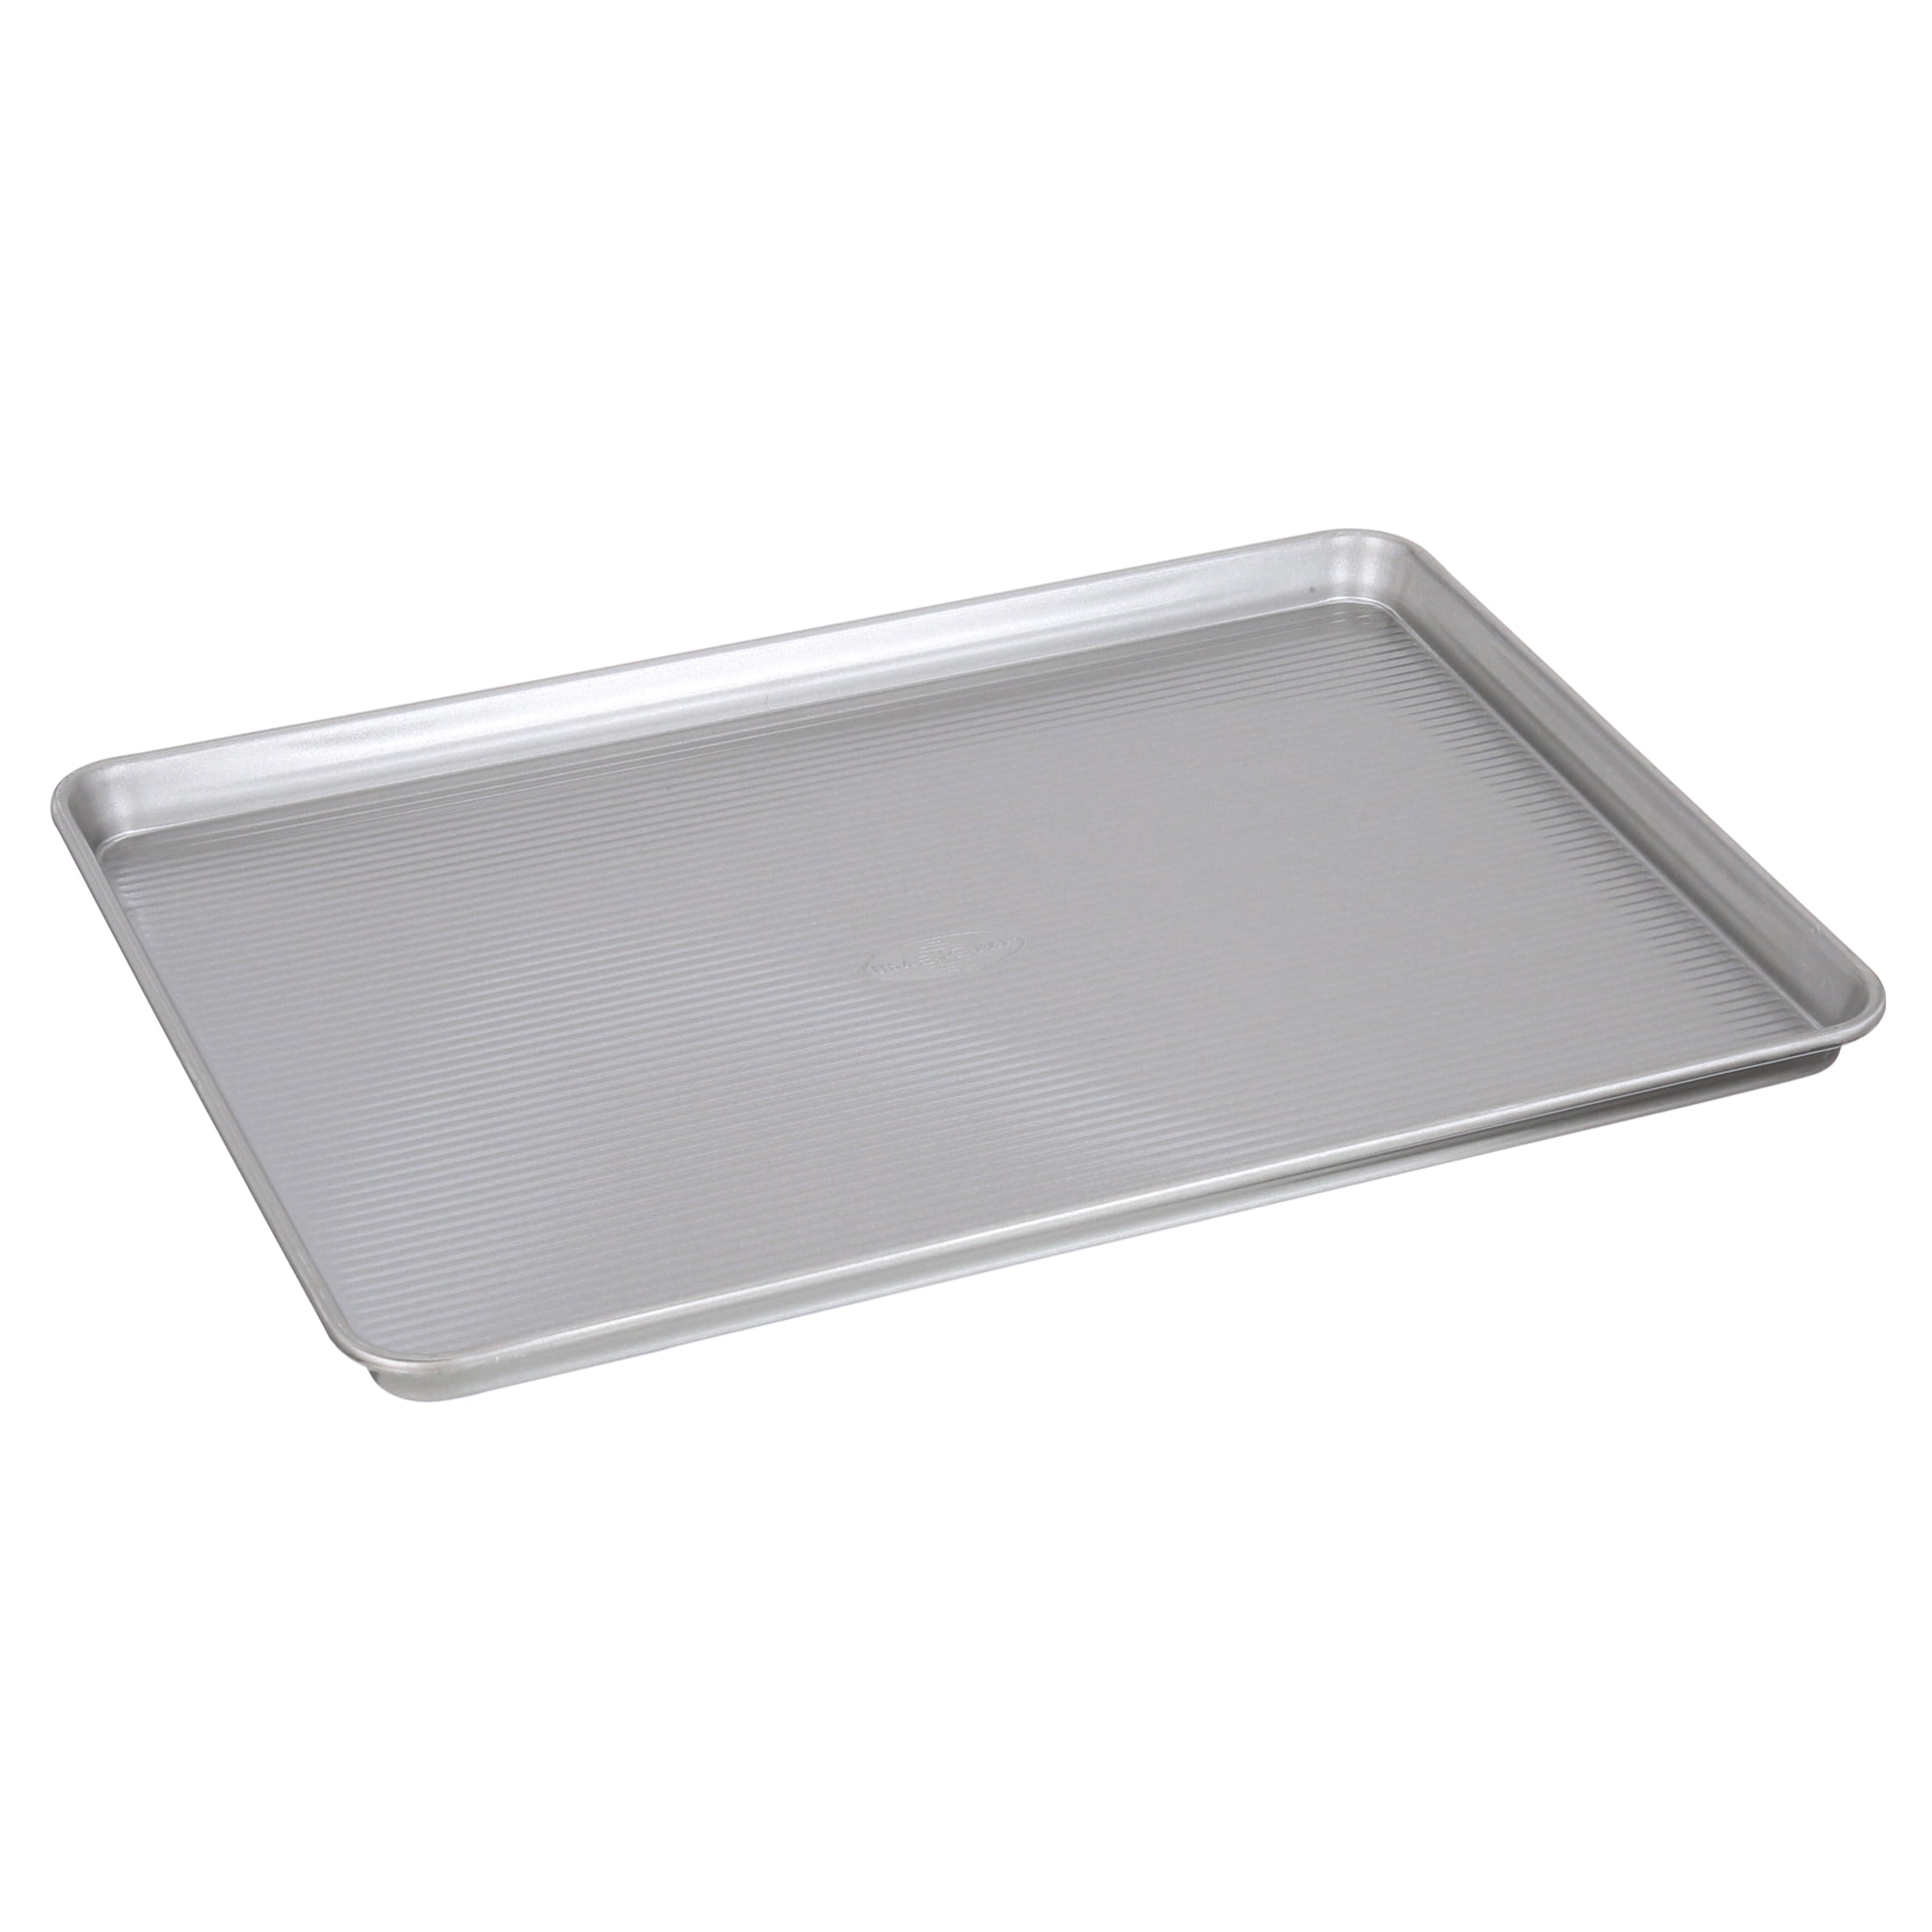 Silicone Sheet Pan Set,4pcs Silicone Dividers For Baking Trays